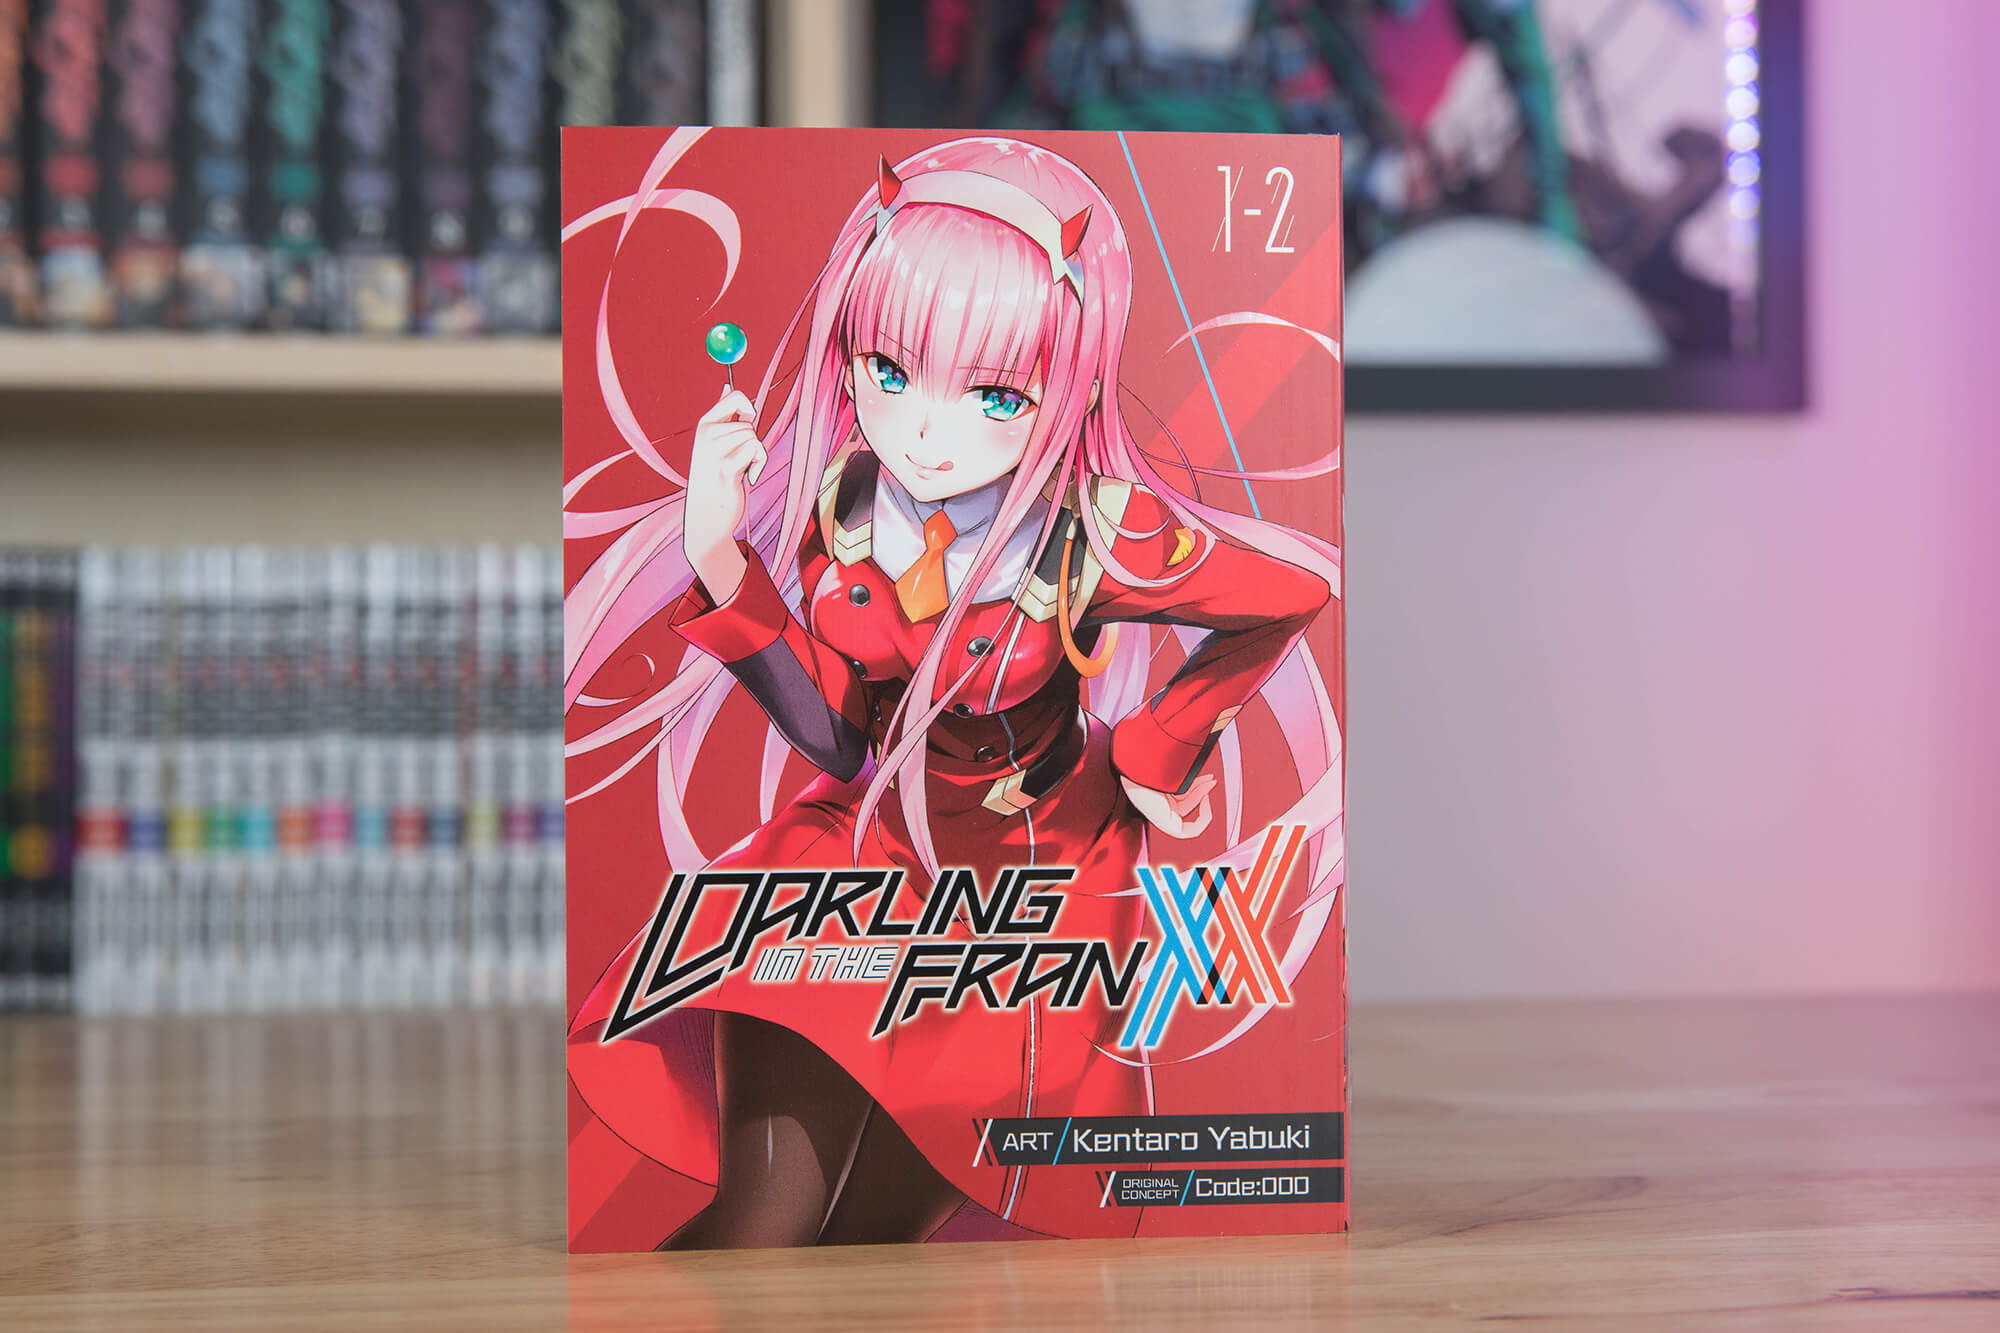 Darling in the Franxx Manga Review